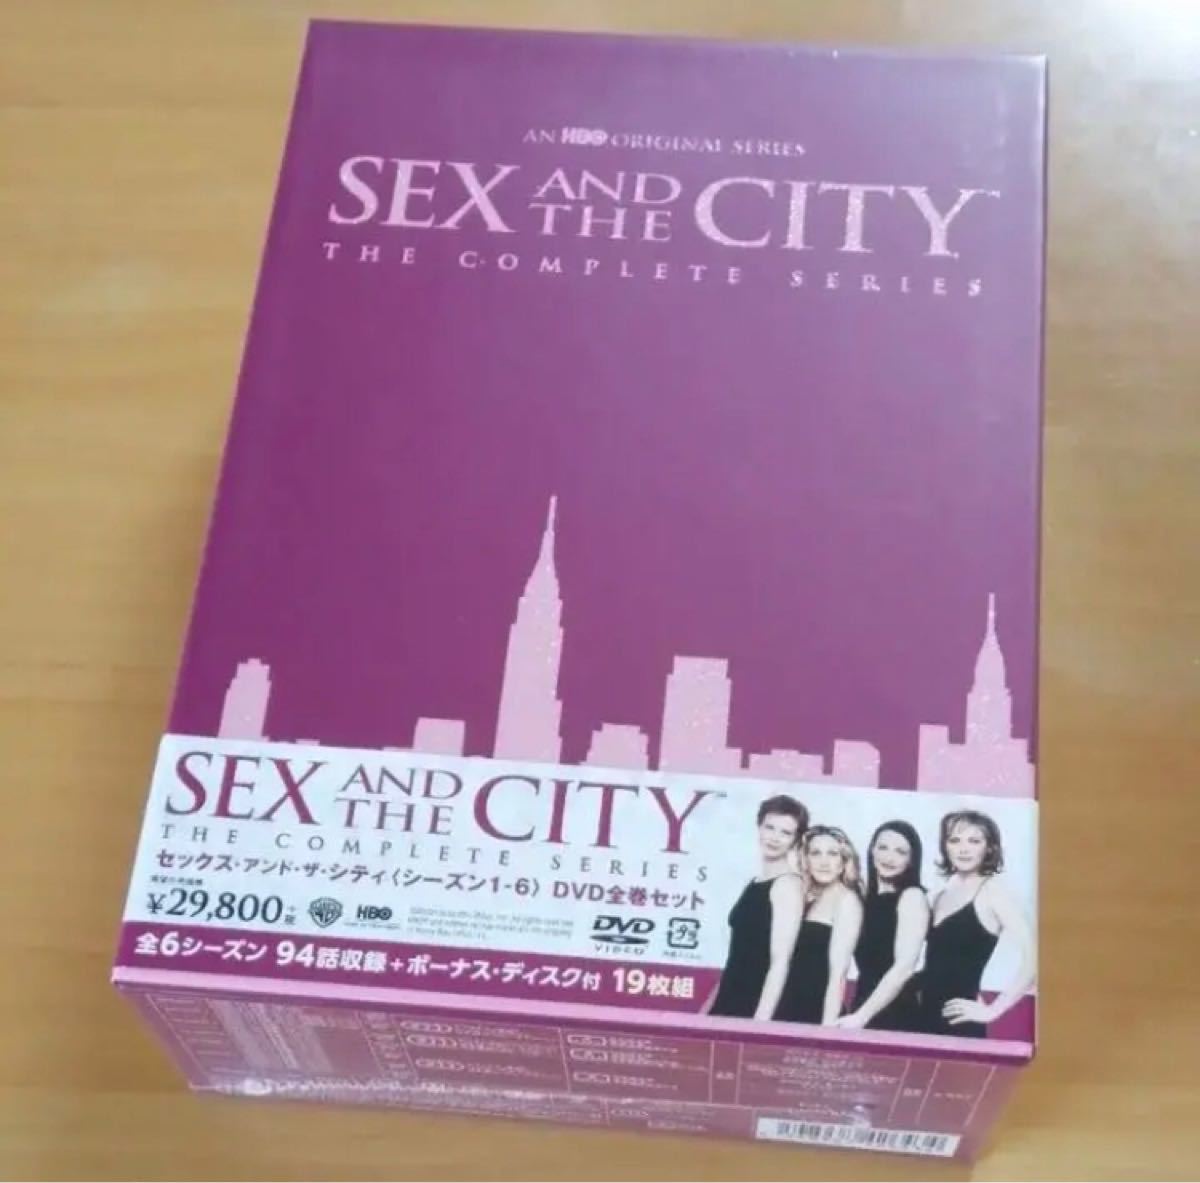 Is There Still Sex in the City? 洋書　原作